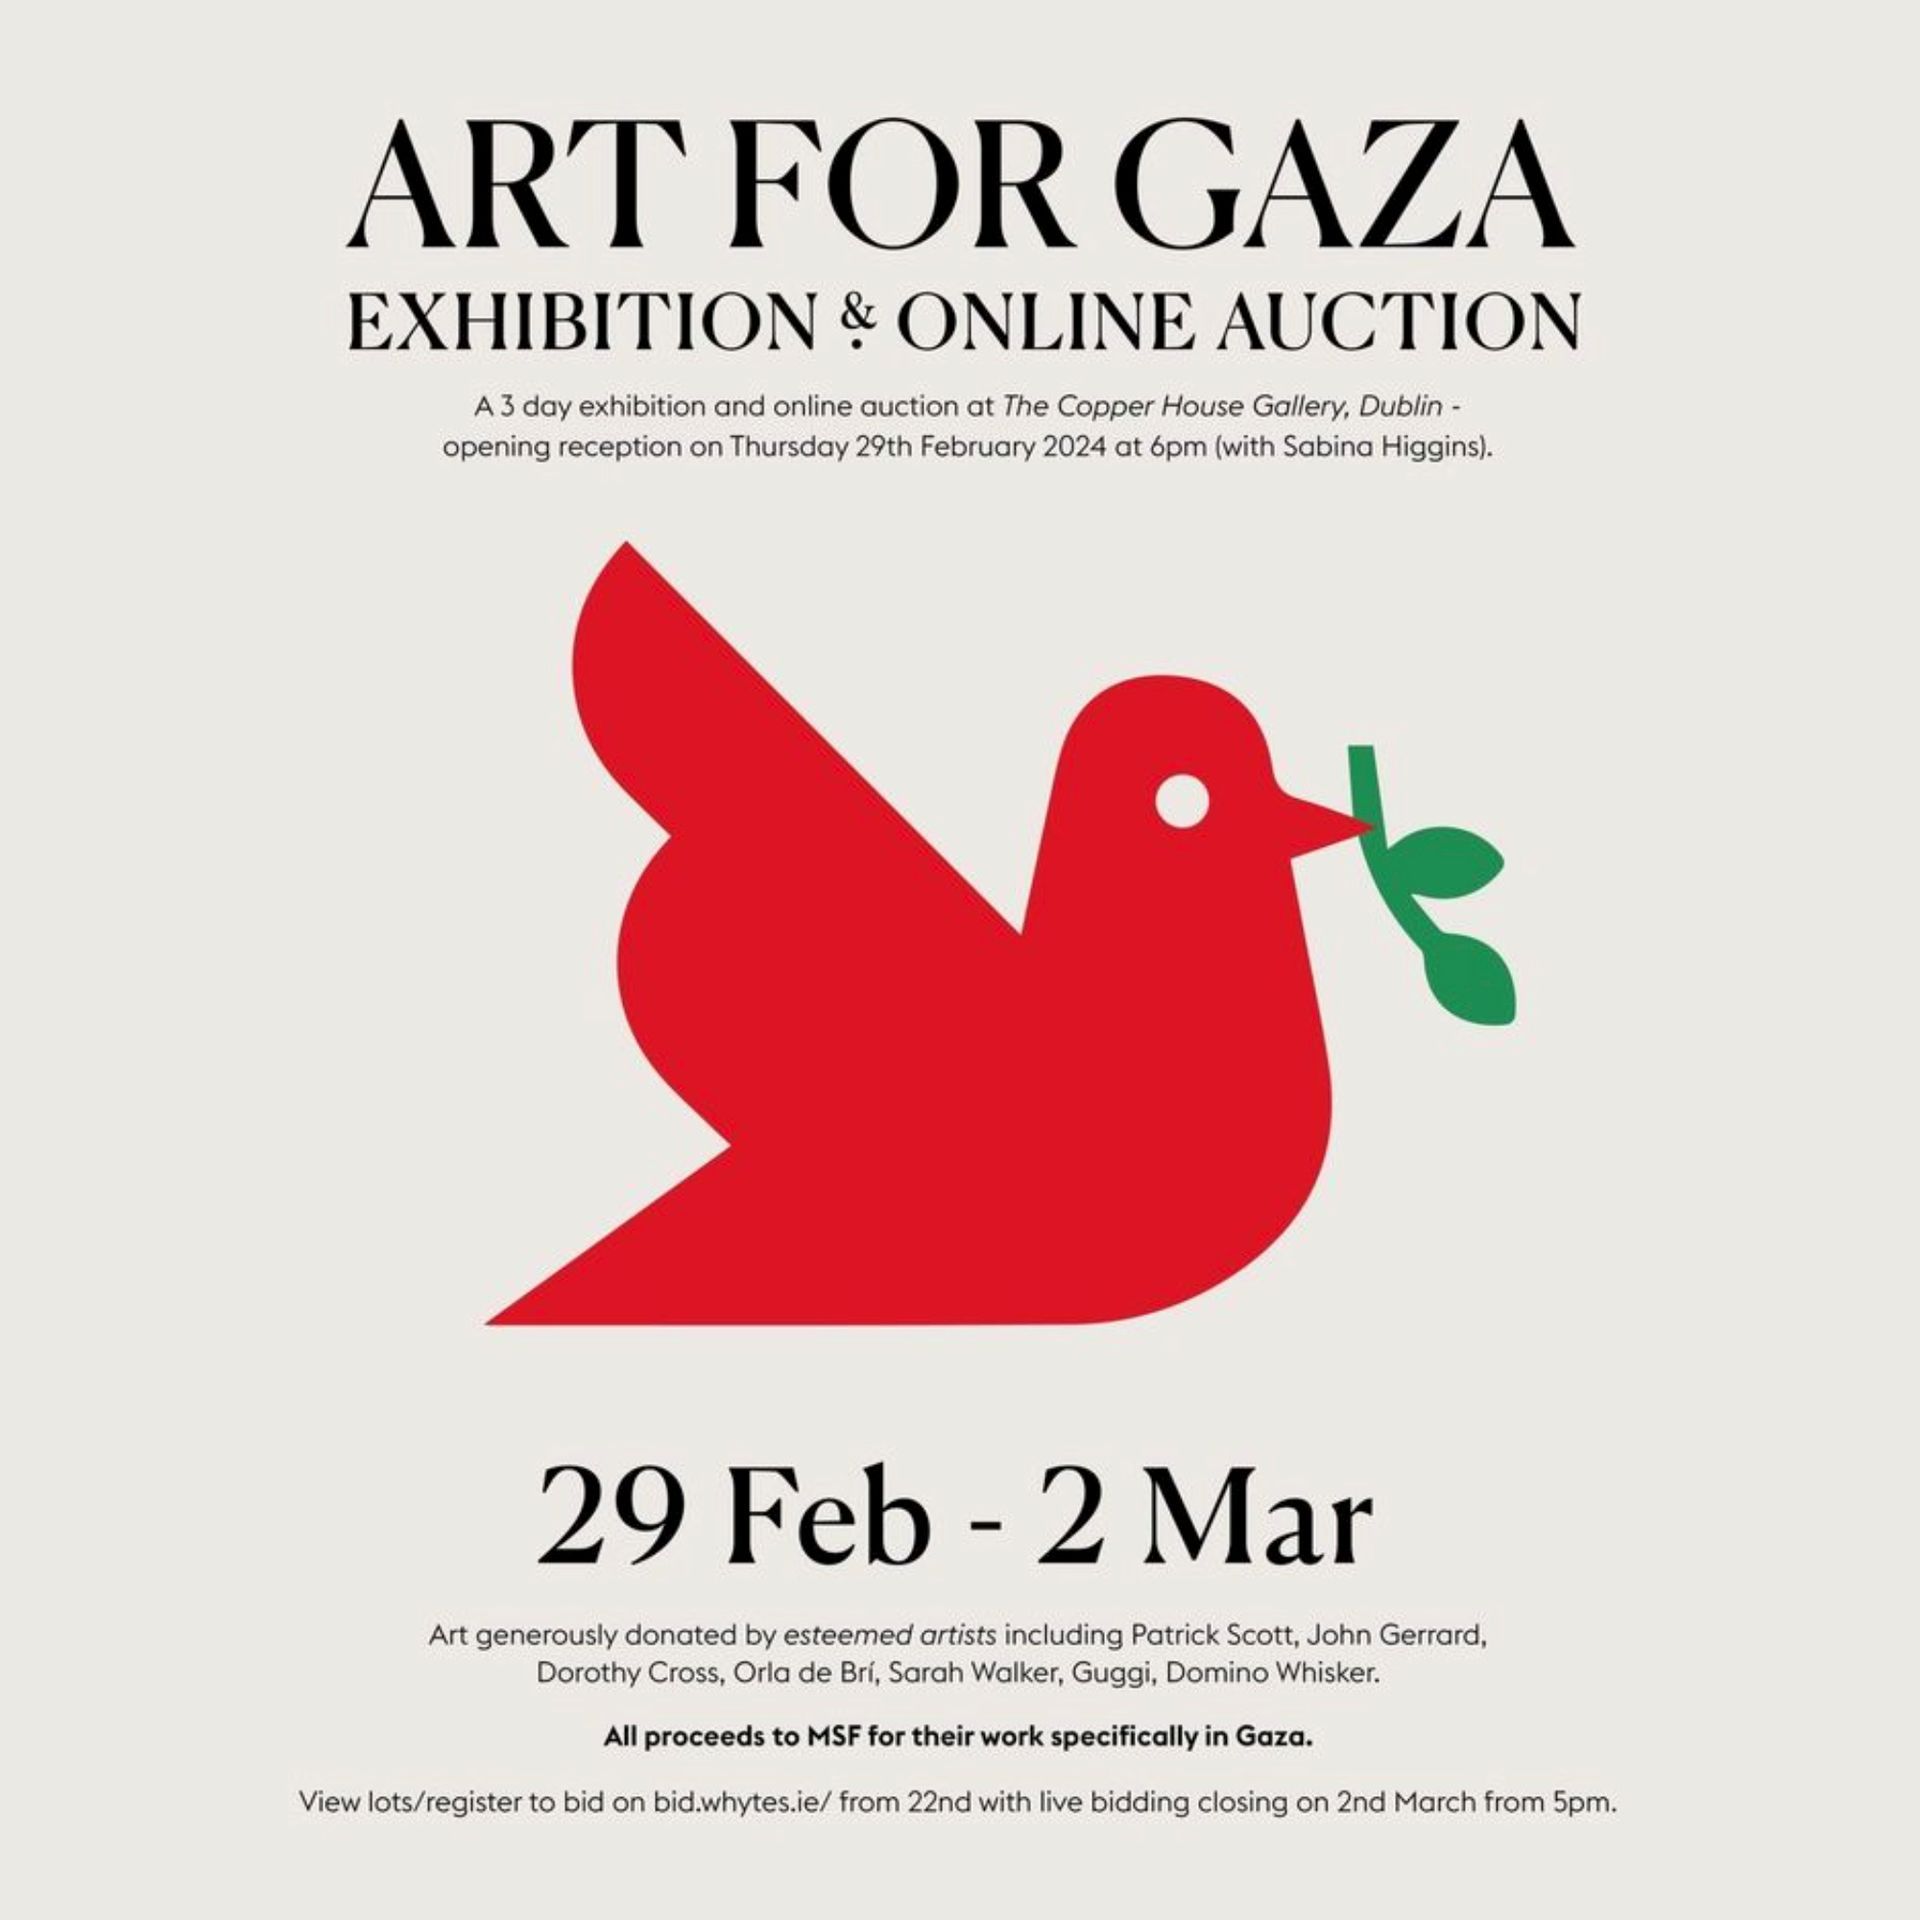 Art for Gaza Poster
Large red bird with olive branch in its beak. The poster contains the text Art For Gaza, Exhibition and online auction, 29 Feb - 2 Mar